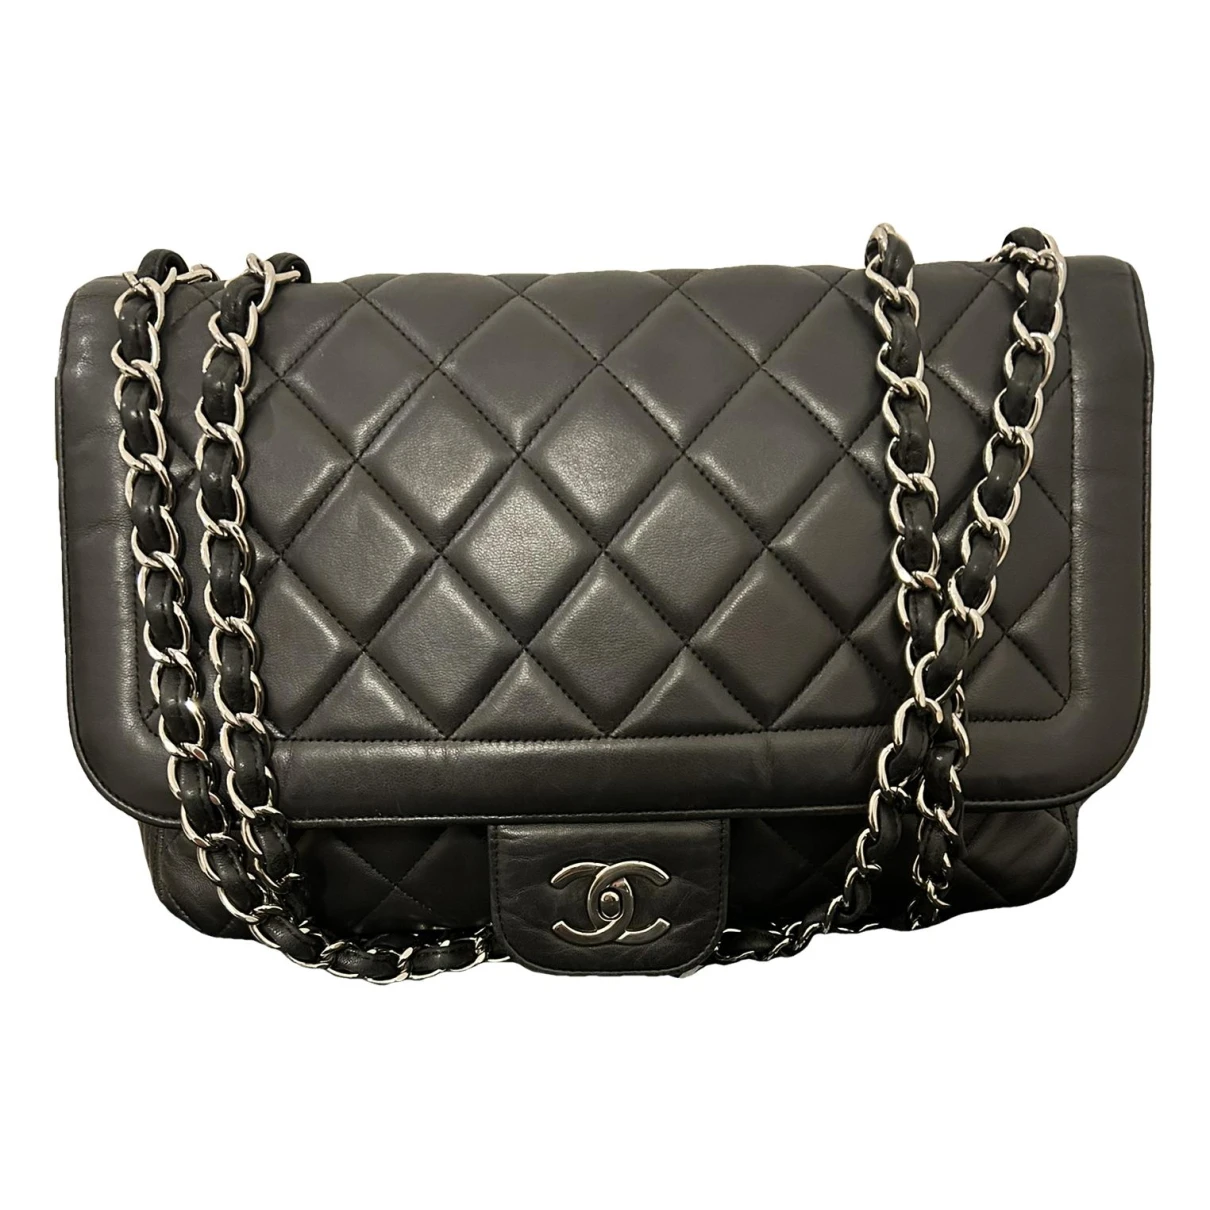 Pre-owned Chanel 2.55 Leather Handbag In Black